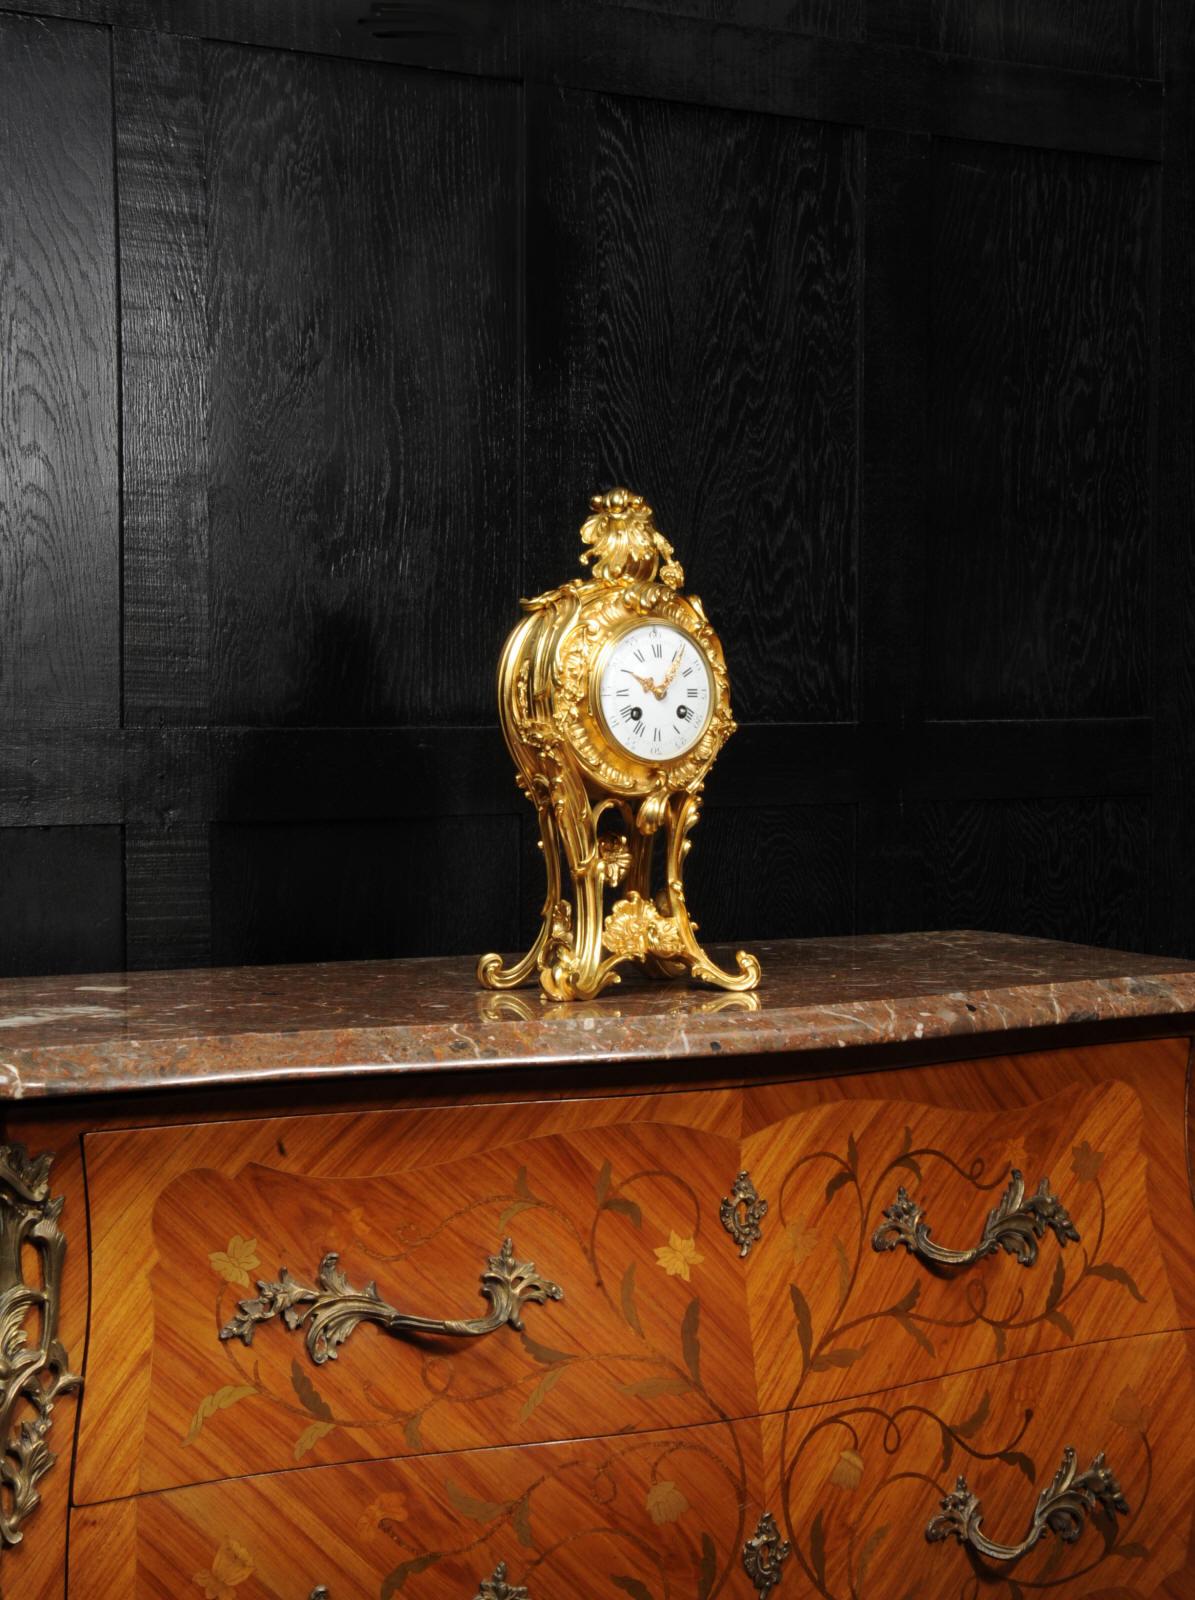 19th Century Superb Antique French Rococo Ormolu Clock with Visible Pendulum by Emile Colin